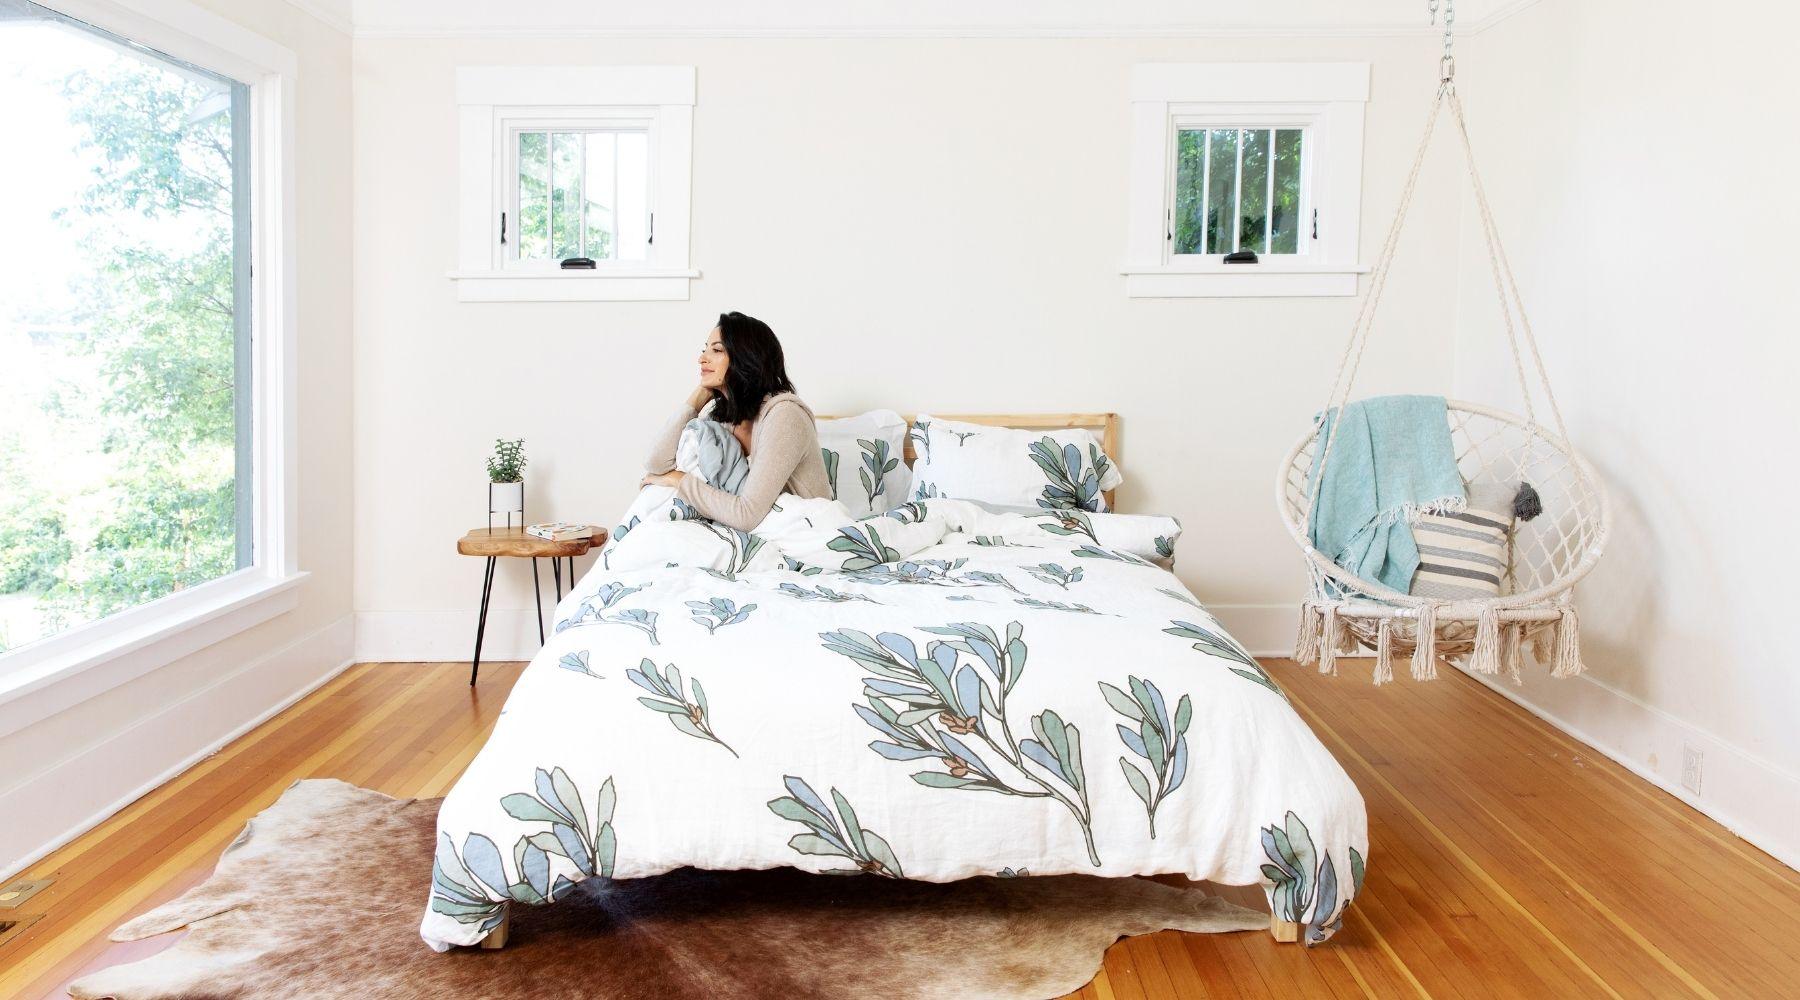 Mixing Patterns and Prints in the Bedroom